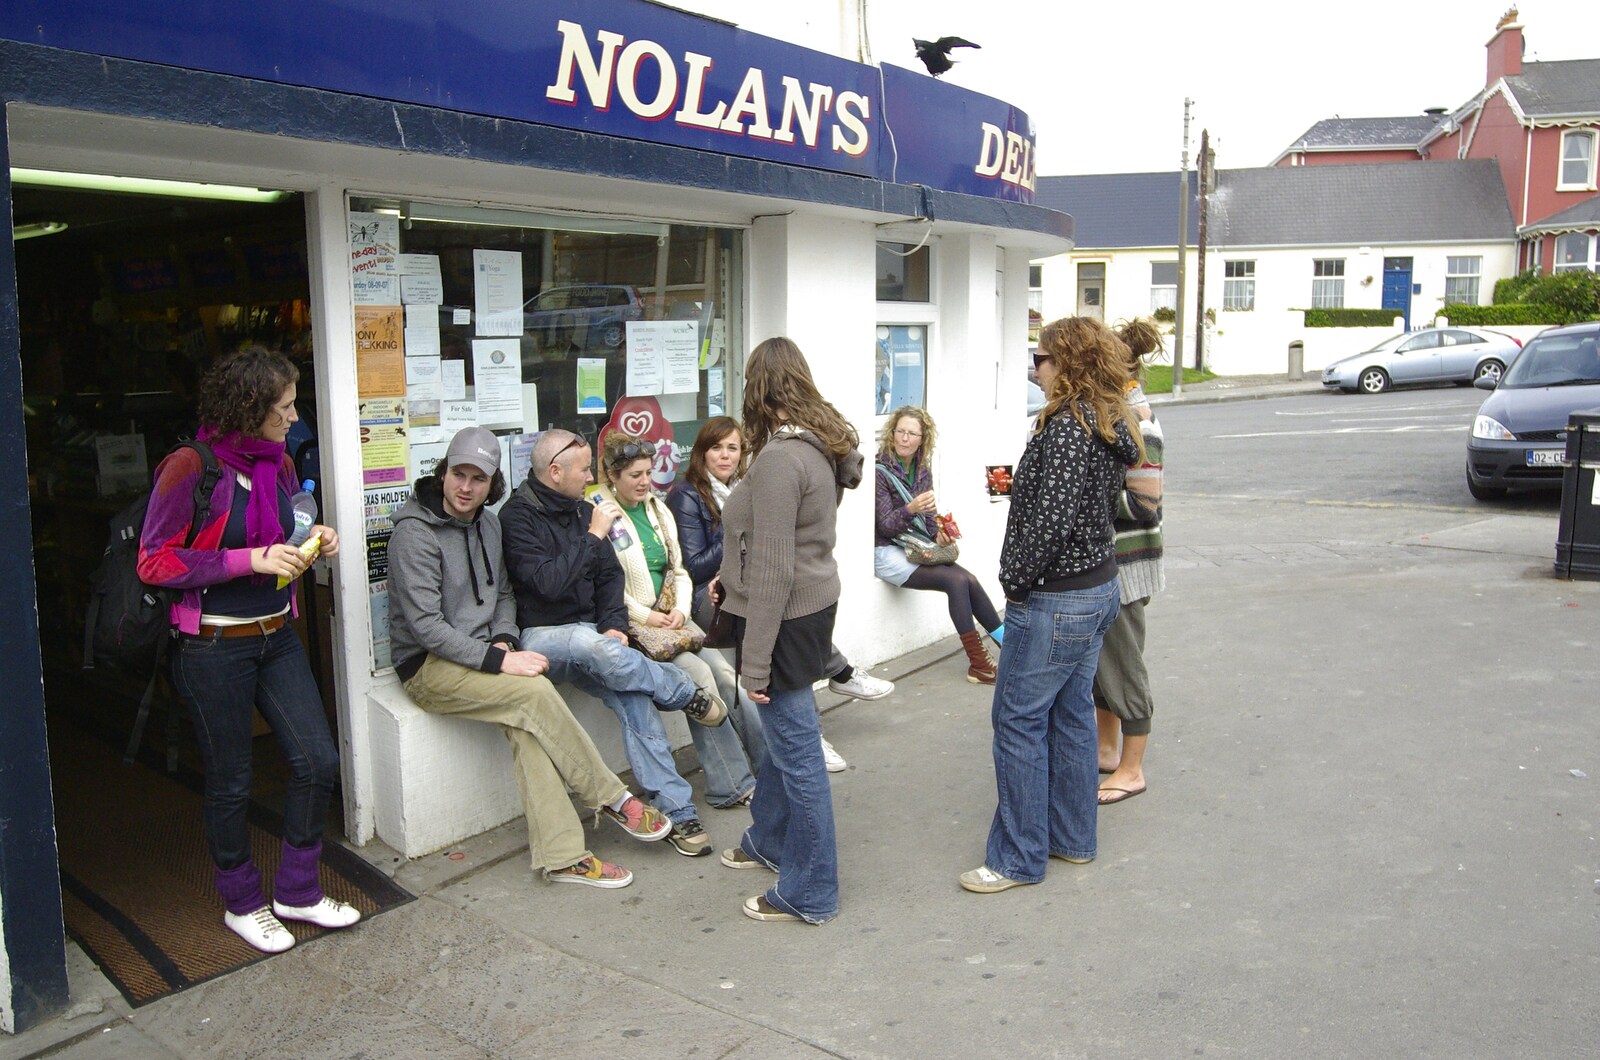 30th Birthday Party in Kilkee, County Clare, Ireland - 22nd September 2007: We hang around outside Nolan's for a bit